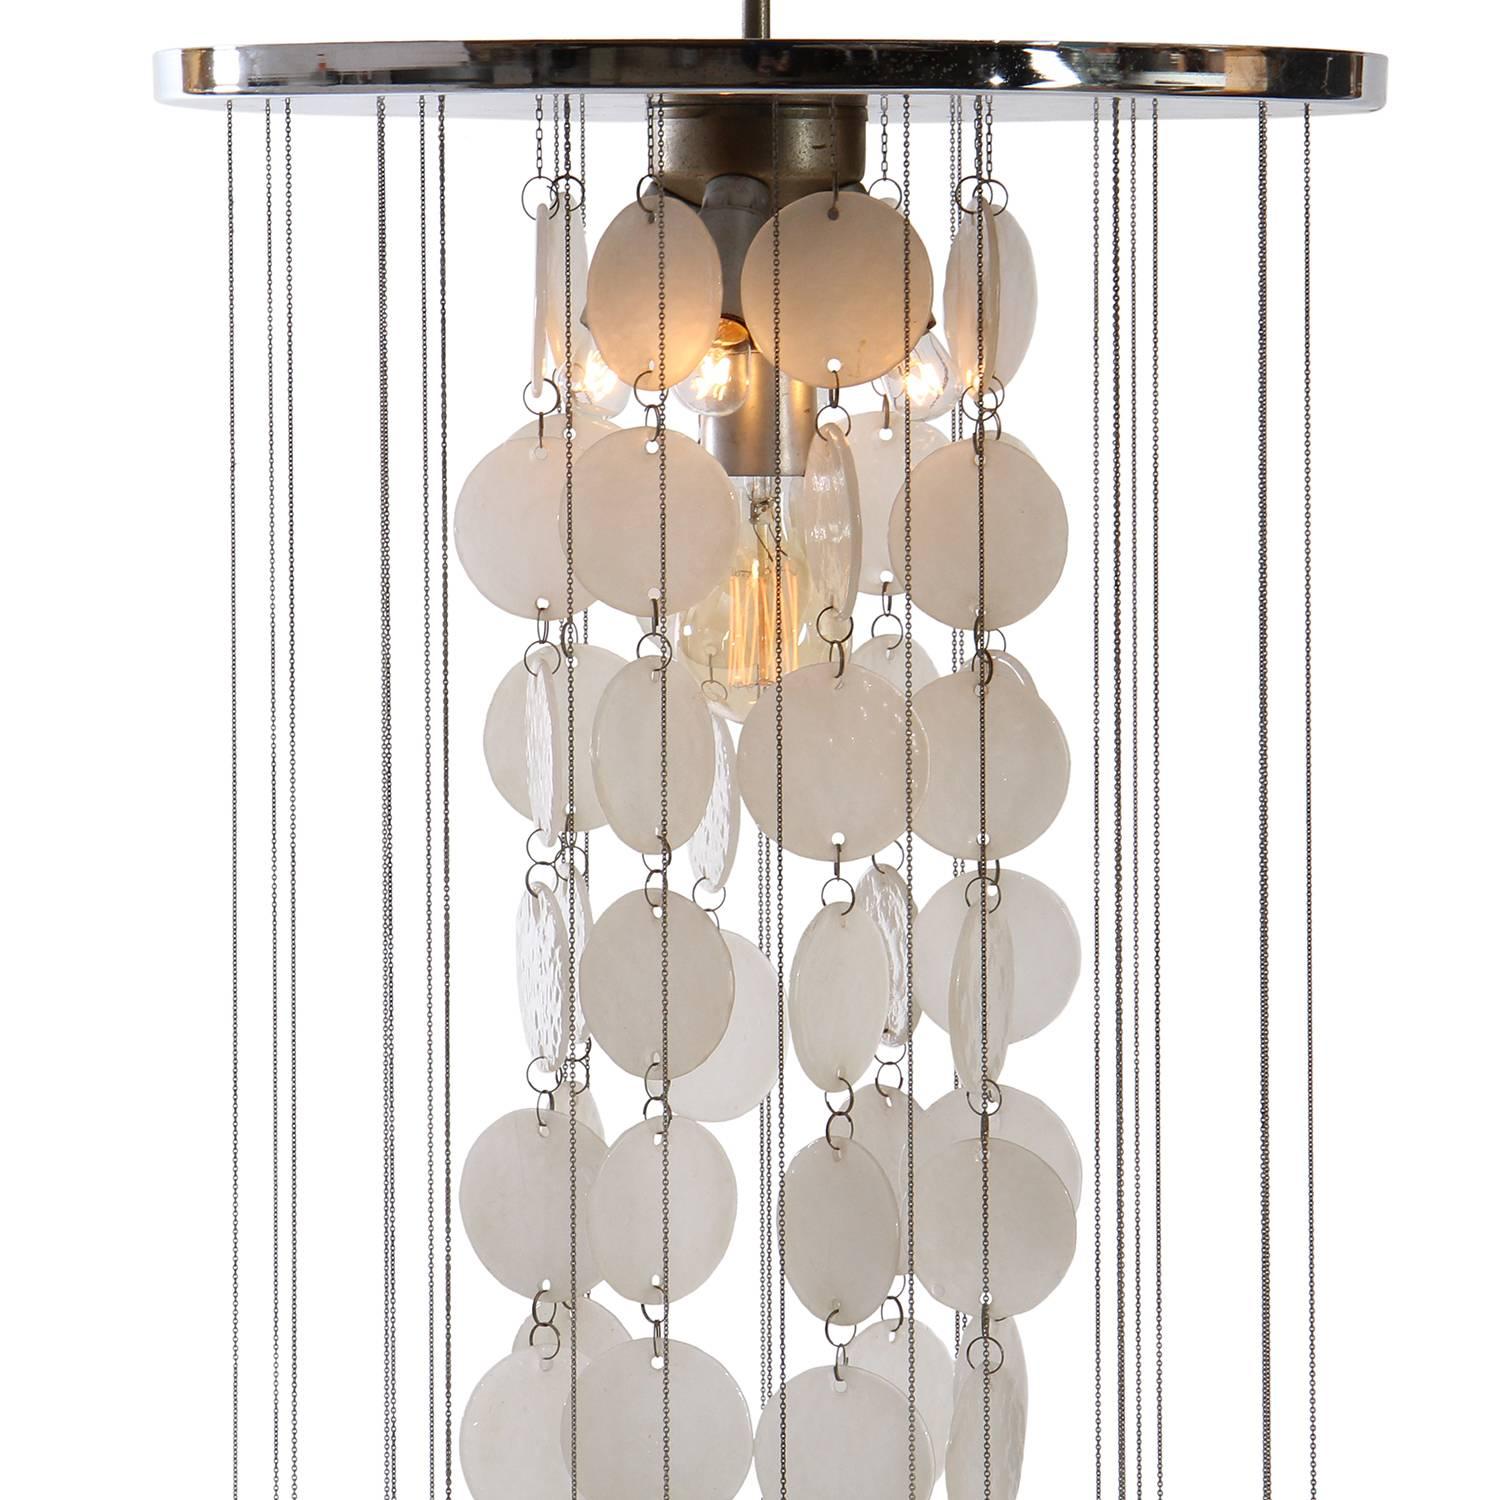 An expressive and well-scaled chandelier having rows of floating translucent Murano milk glass discs cascading down from a round chromed steel ceiling plate.